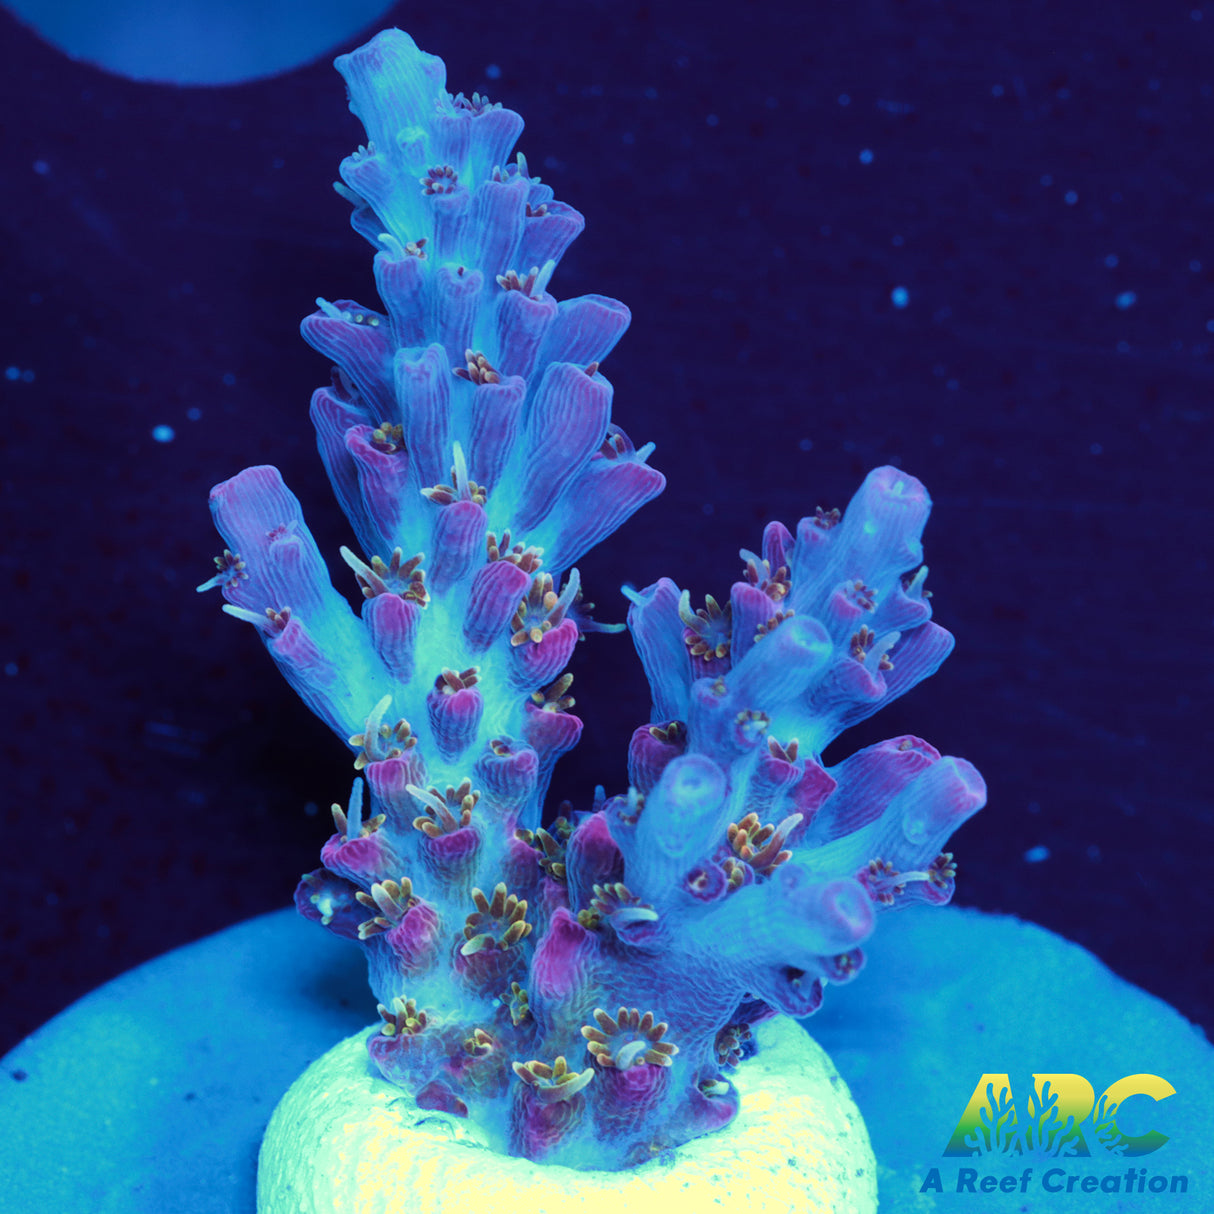 Tyree Pinky the Bear – A Reef Creation